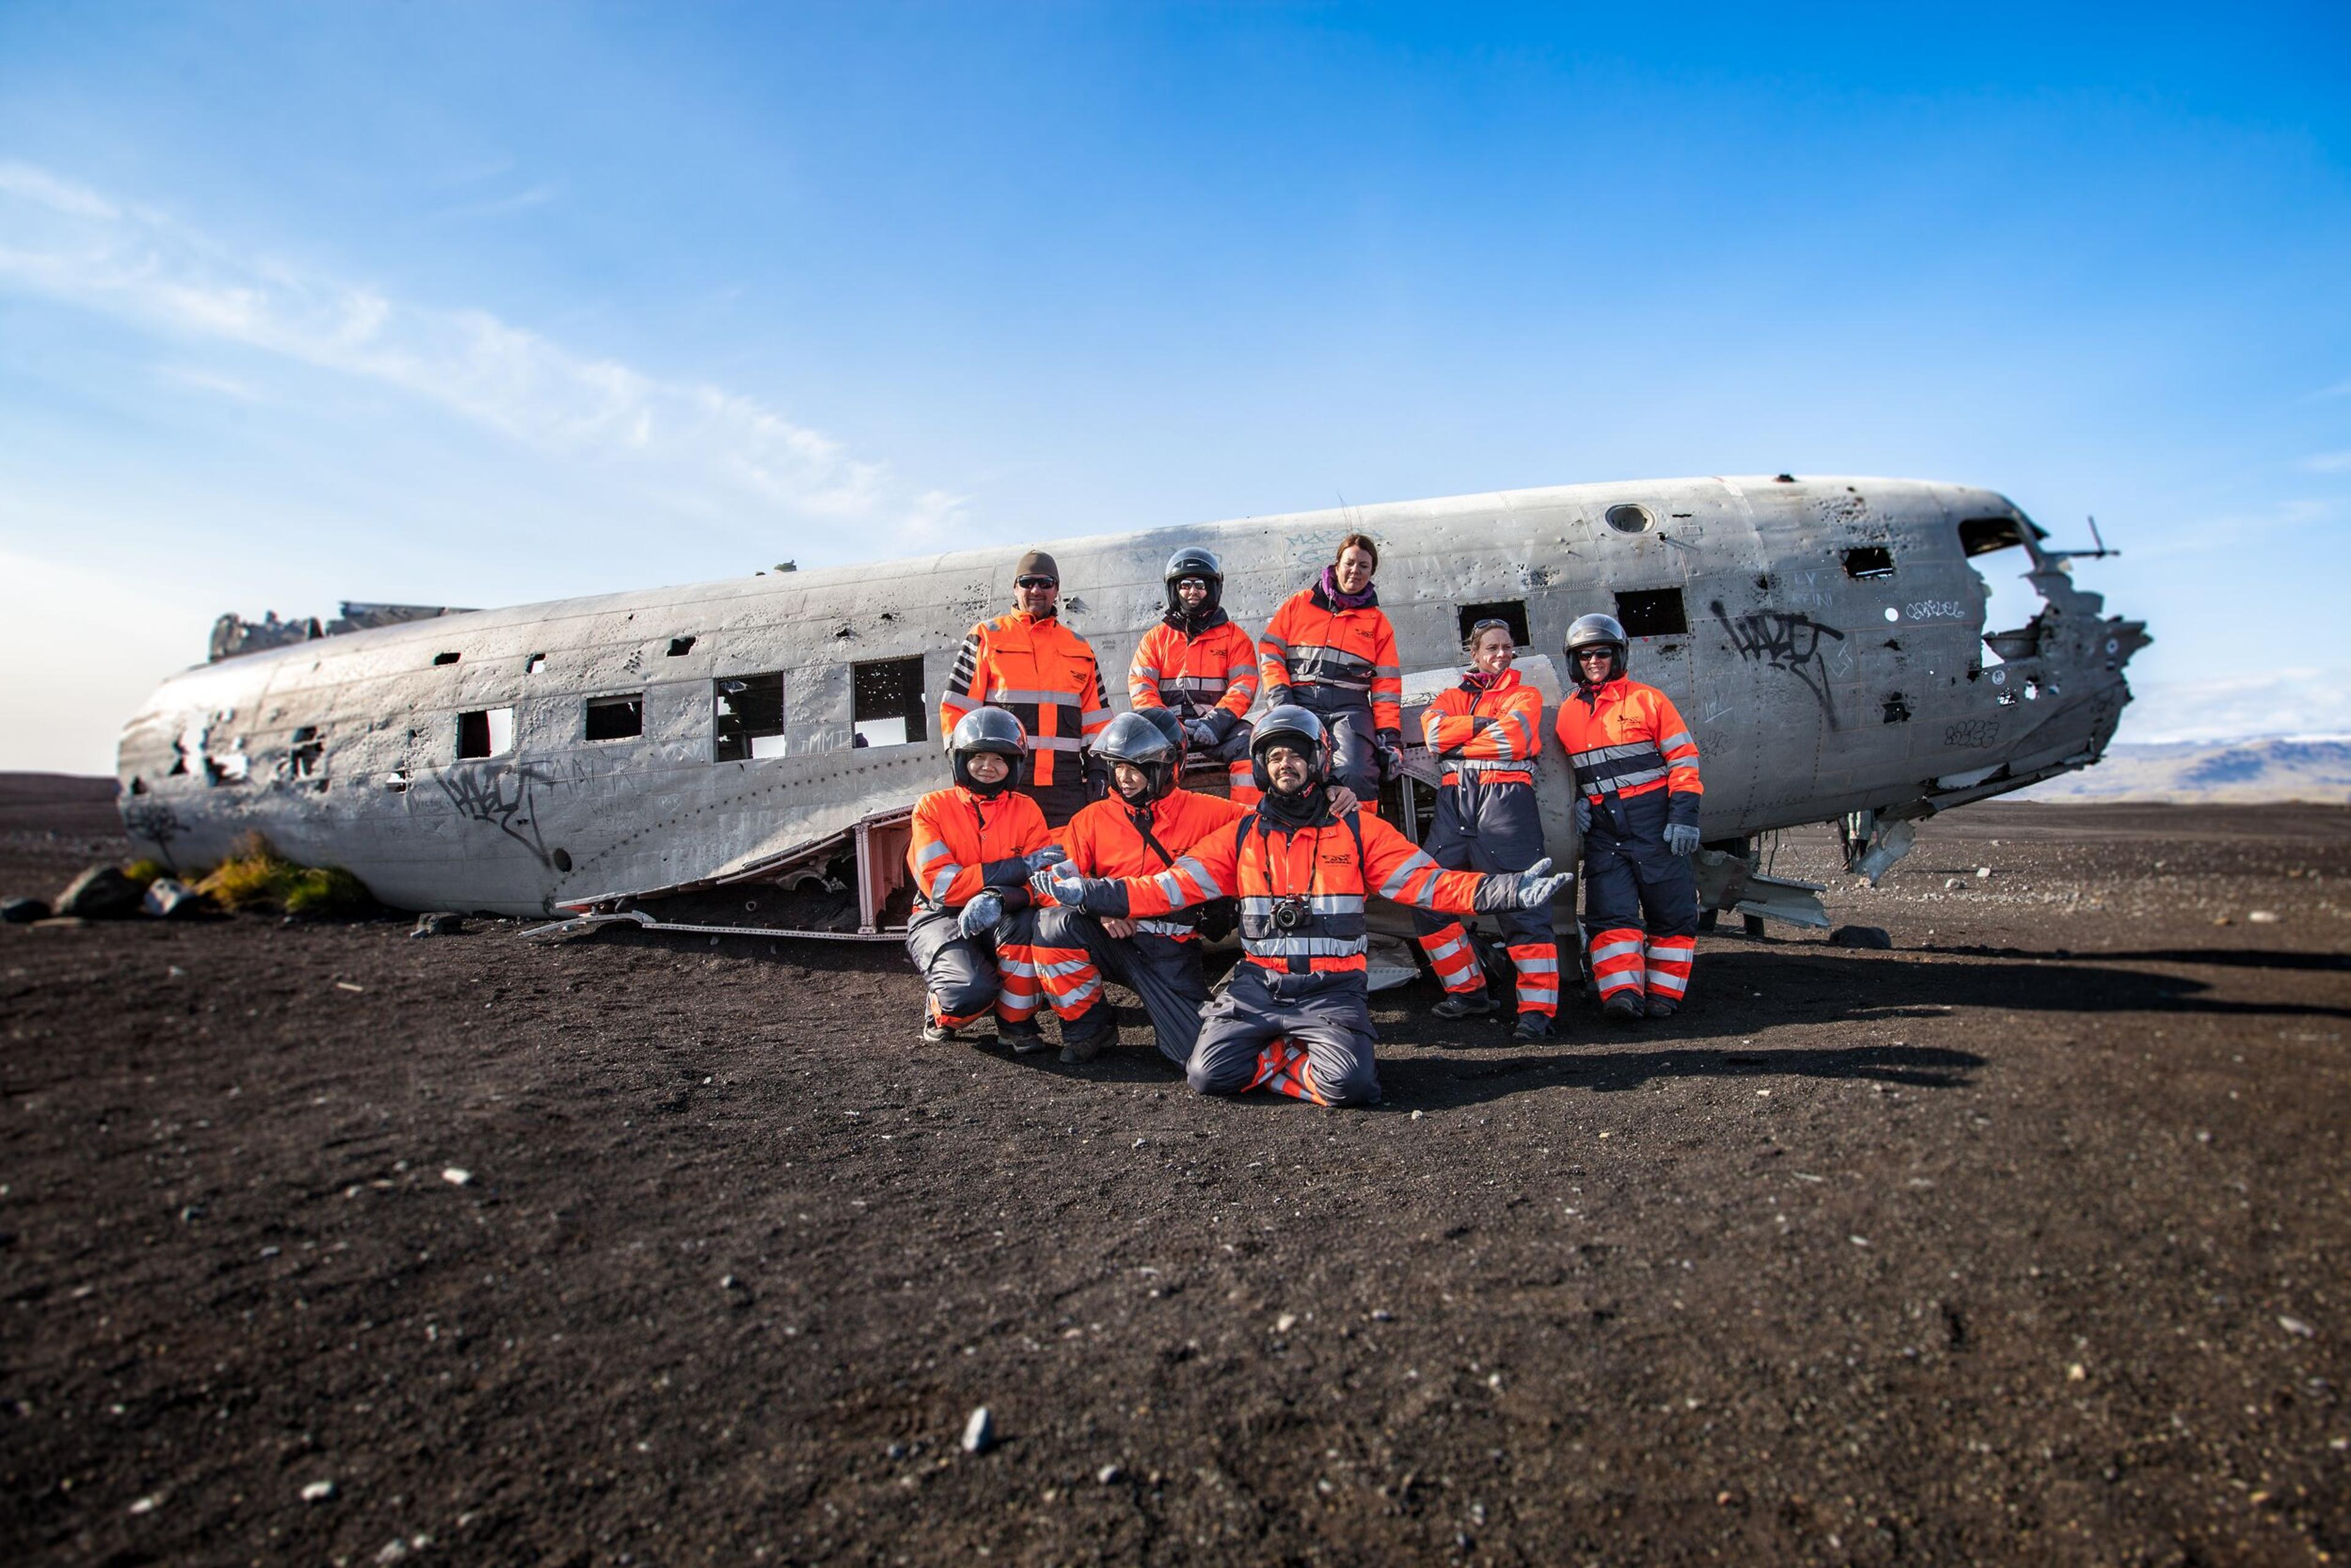 Group Photo Session at Iceland's Famous Plane Wreck Site